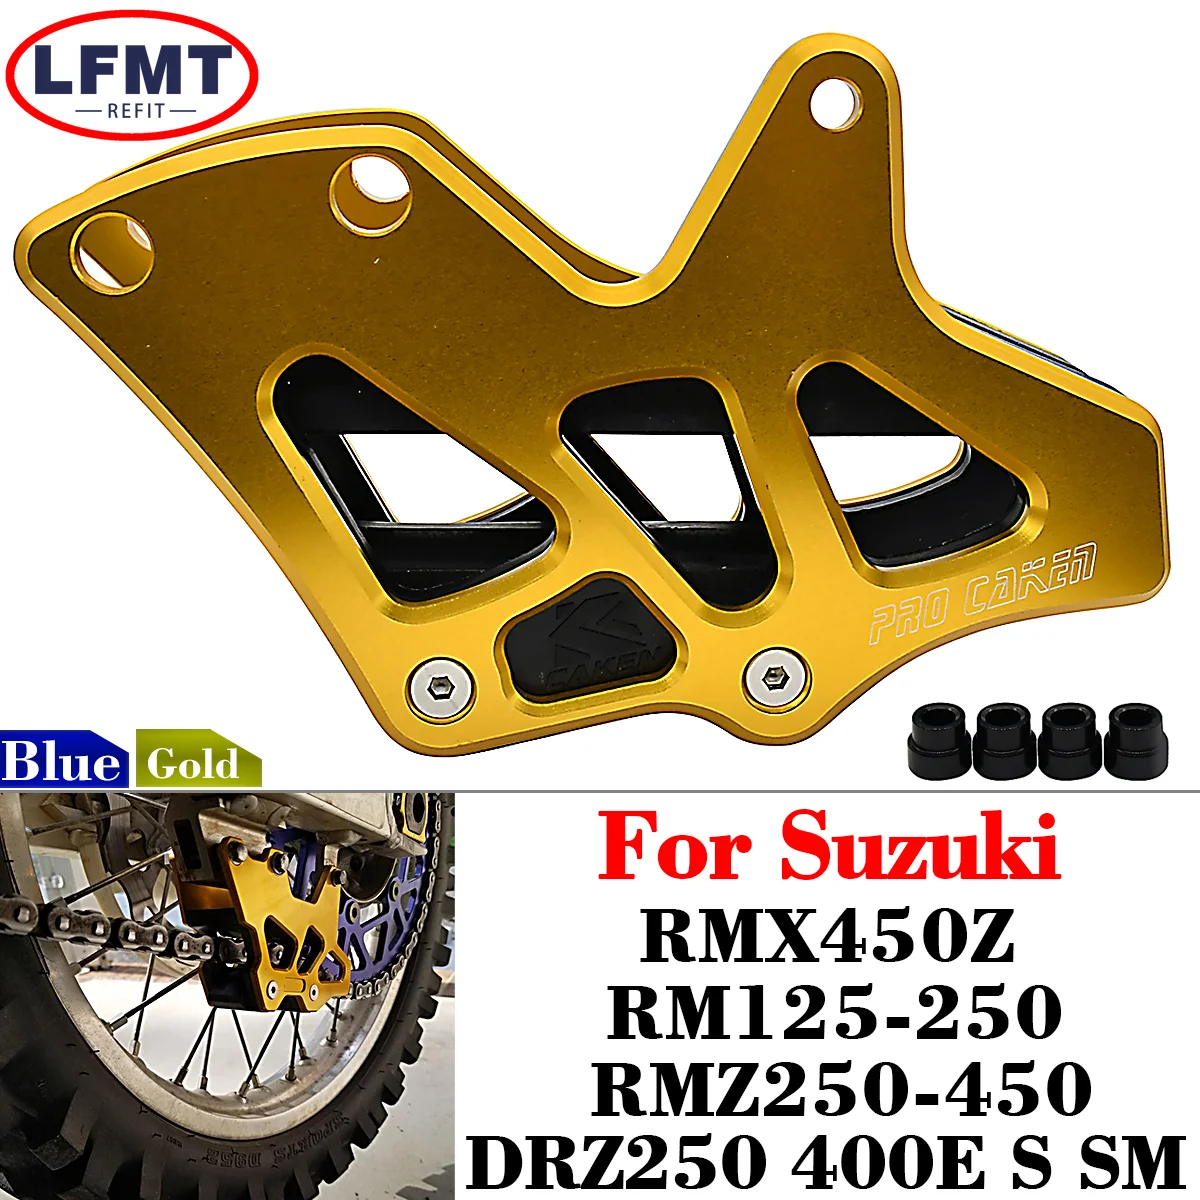 

Motorcycle CNC Chain Guide Guard Protection For Suzuki RM 250 Z250 Z450 Z450Z Z400SM RM125 RM250 RMZ250 RMZ450 RMZ450Z DRZ400SM